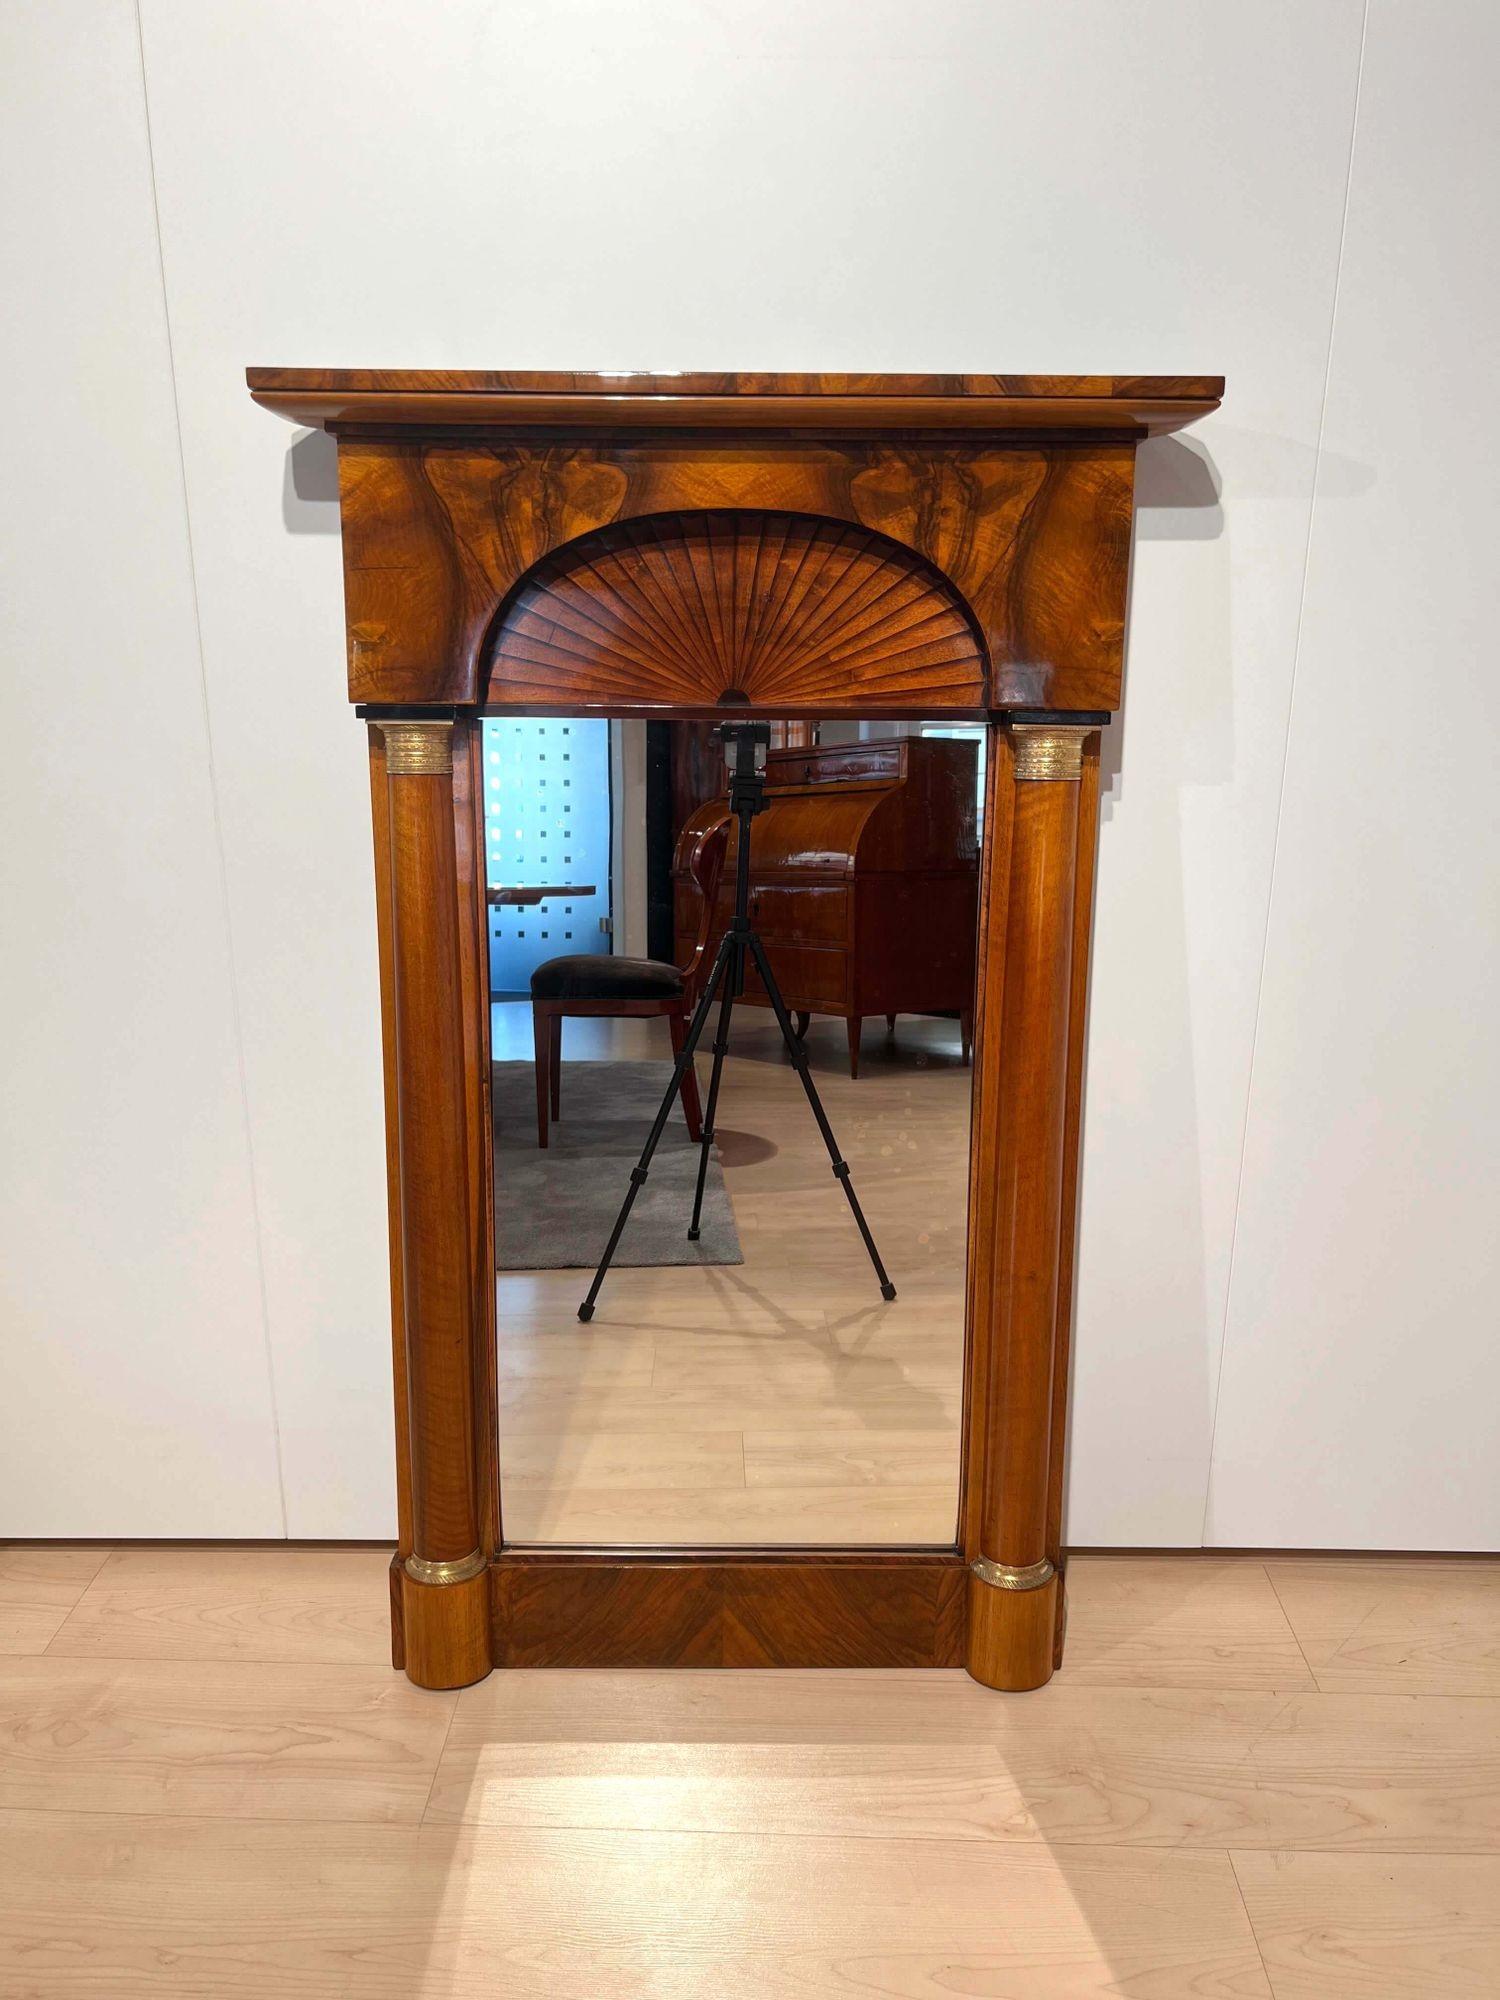  
Biedermeier wall mirror with fan decor, from Central Germany circa 1820
 
Walnut veneered and solid wood. Cornice with imposing maple work in fan shape (burnt). Bounded by 2 half columns in walnut wood. Old mirror glass. Restored and hand polished